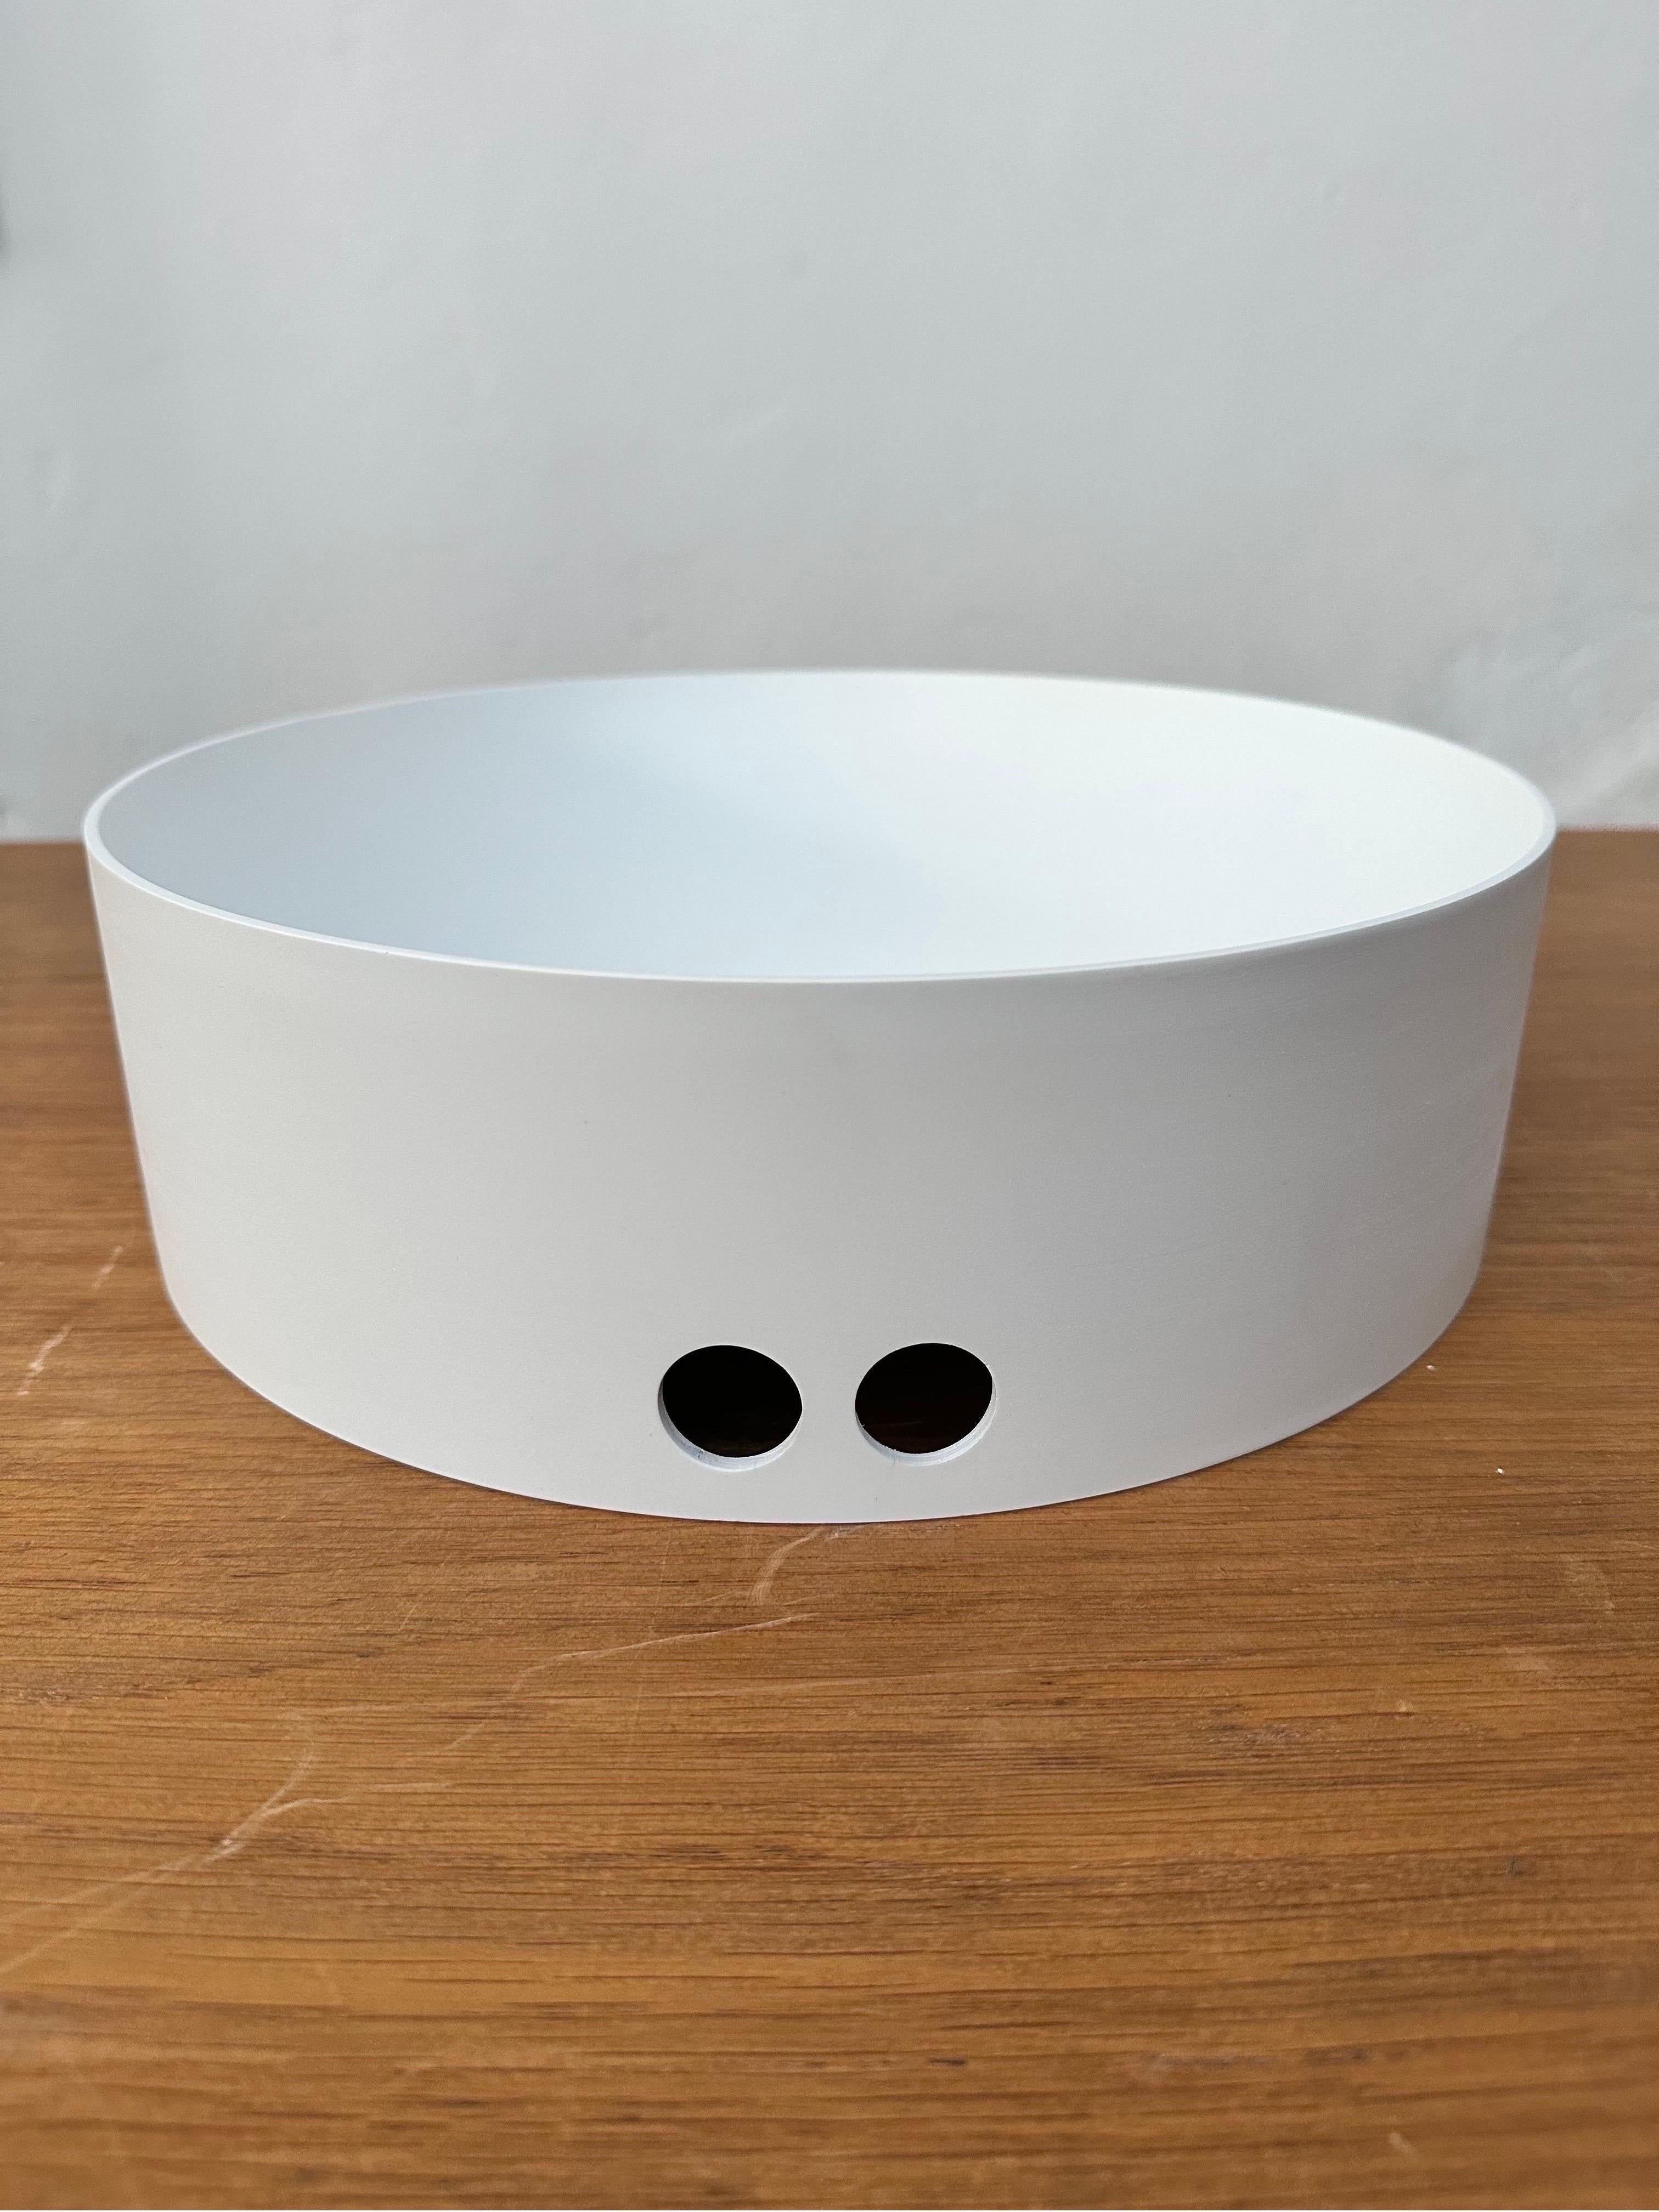 Vintage Enzo Mari Fruit Bowl in White Fiberglass for Danese Milano, 1960s

Enhance your home decor with this iconic Enzo Mari fruit bowl, a timeless design piece from the 1960s manufactured by Danese Milano. Crafted in Italy, this exquisite fruit